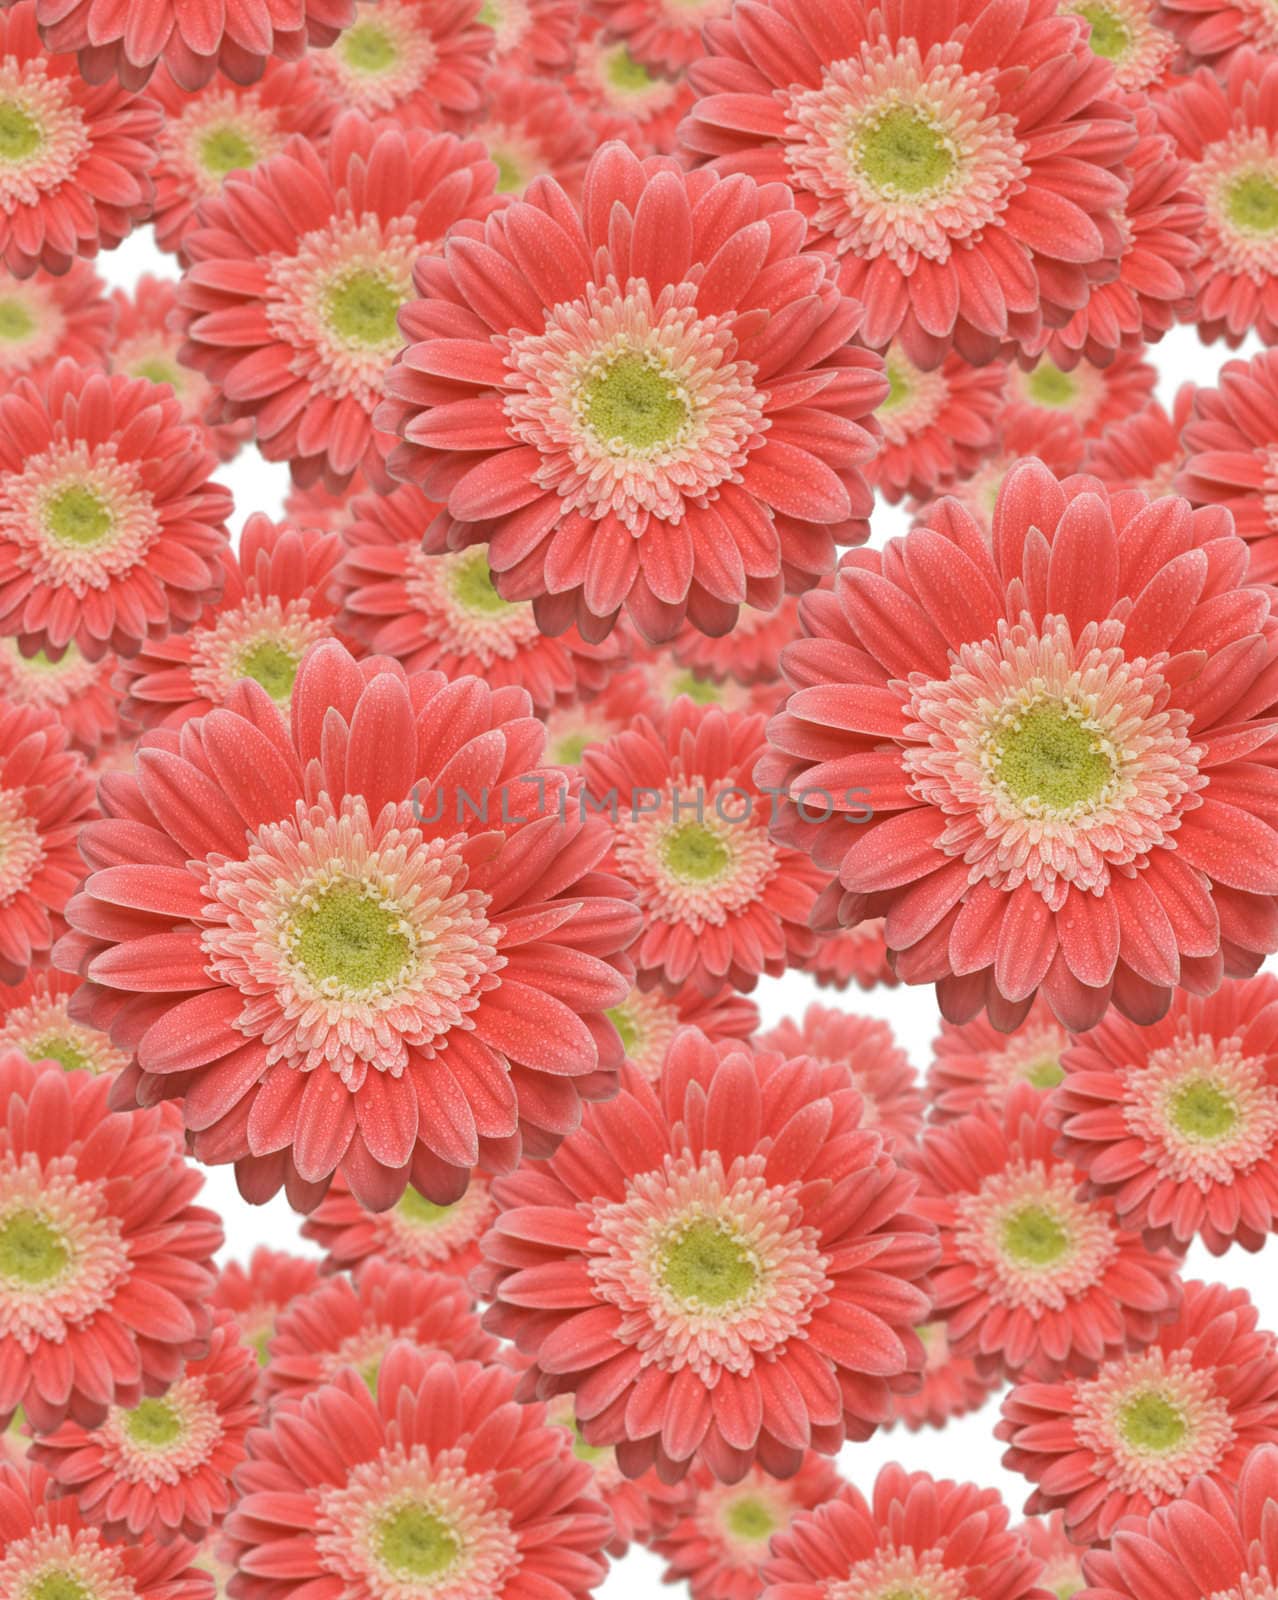 Falling Gerber Daisies by Feverpitched